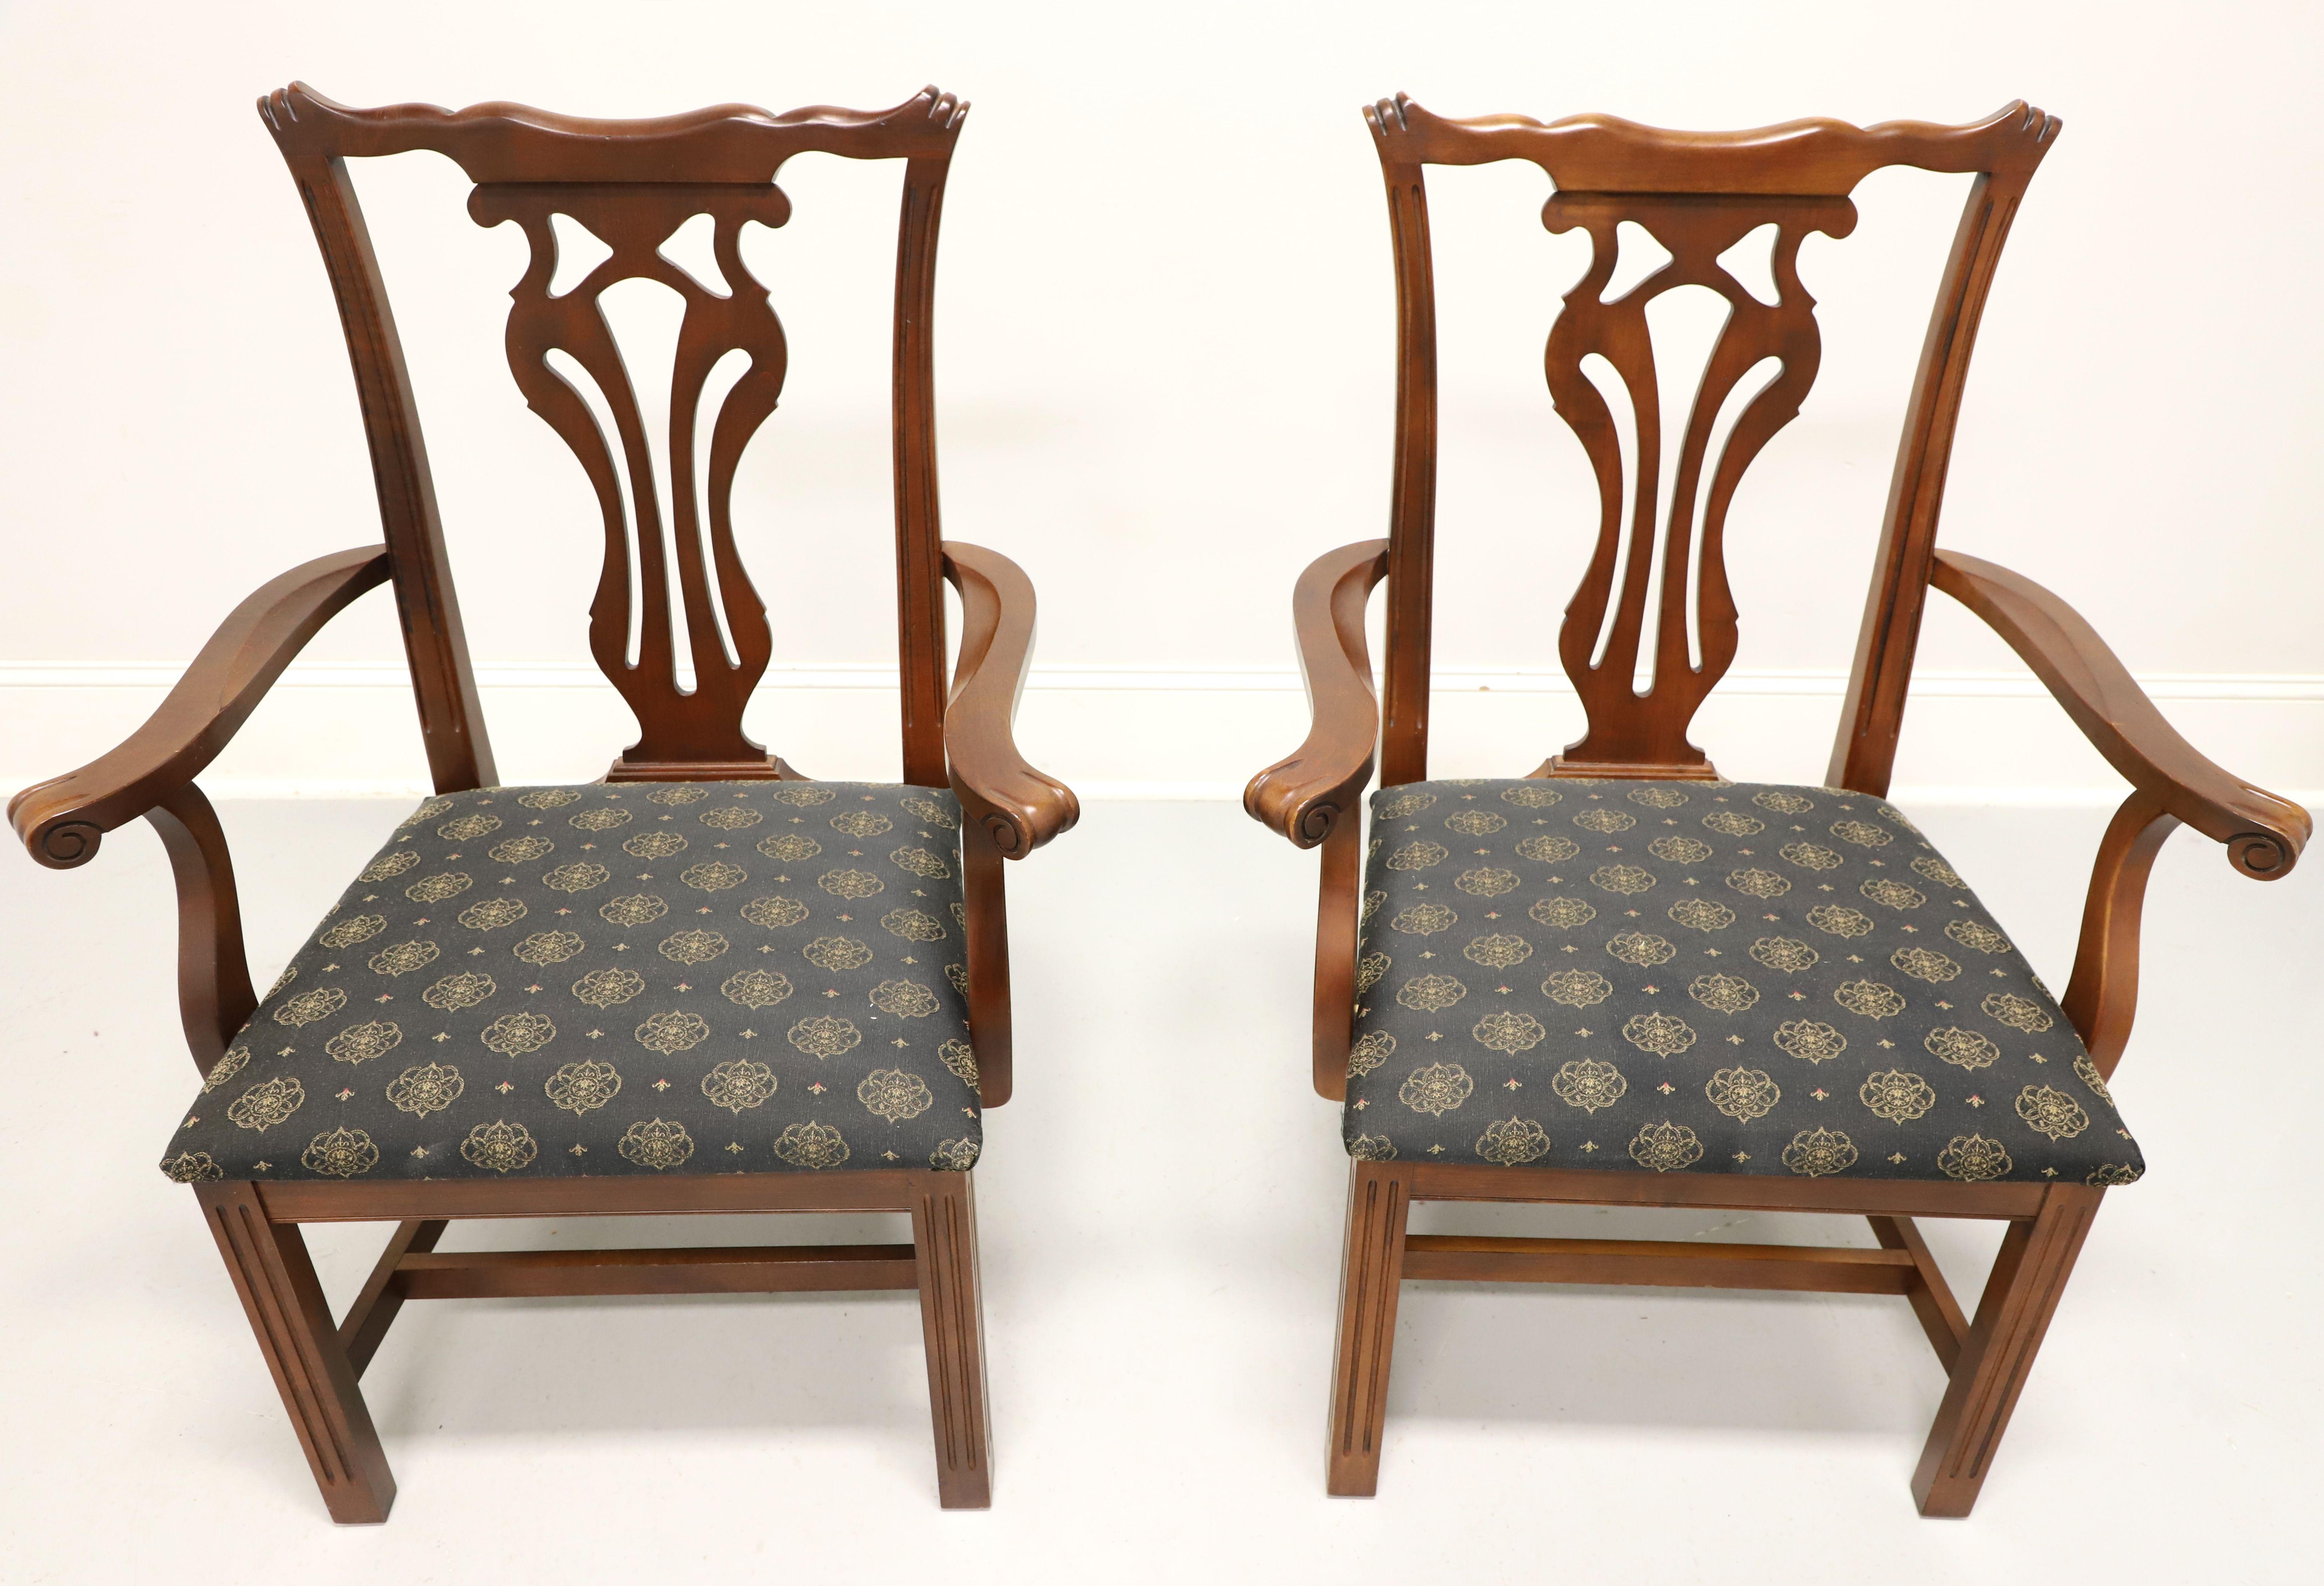 A pair of dining armchairs in the Chippendale style by Knob Creek.  Mahogany with carved backrests, curved arms, black & gold color fabric upholstered seat, stretcher base, and straight legs. Made in the USA, in the late 20th Century.

Measures: 